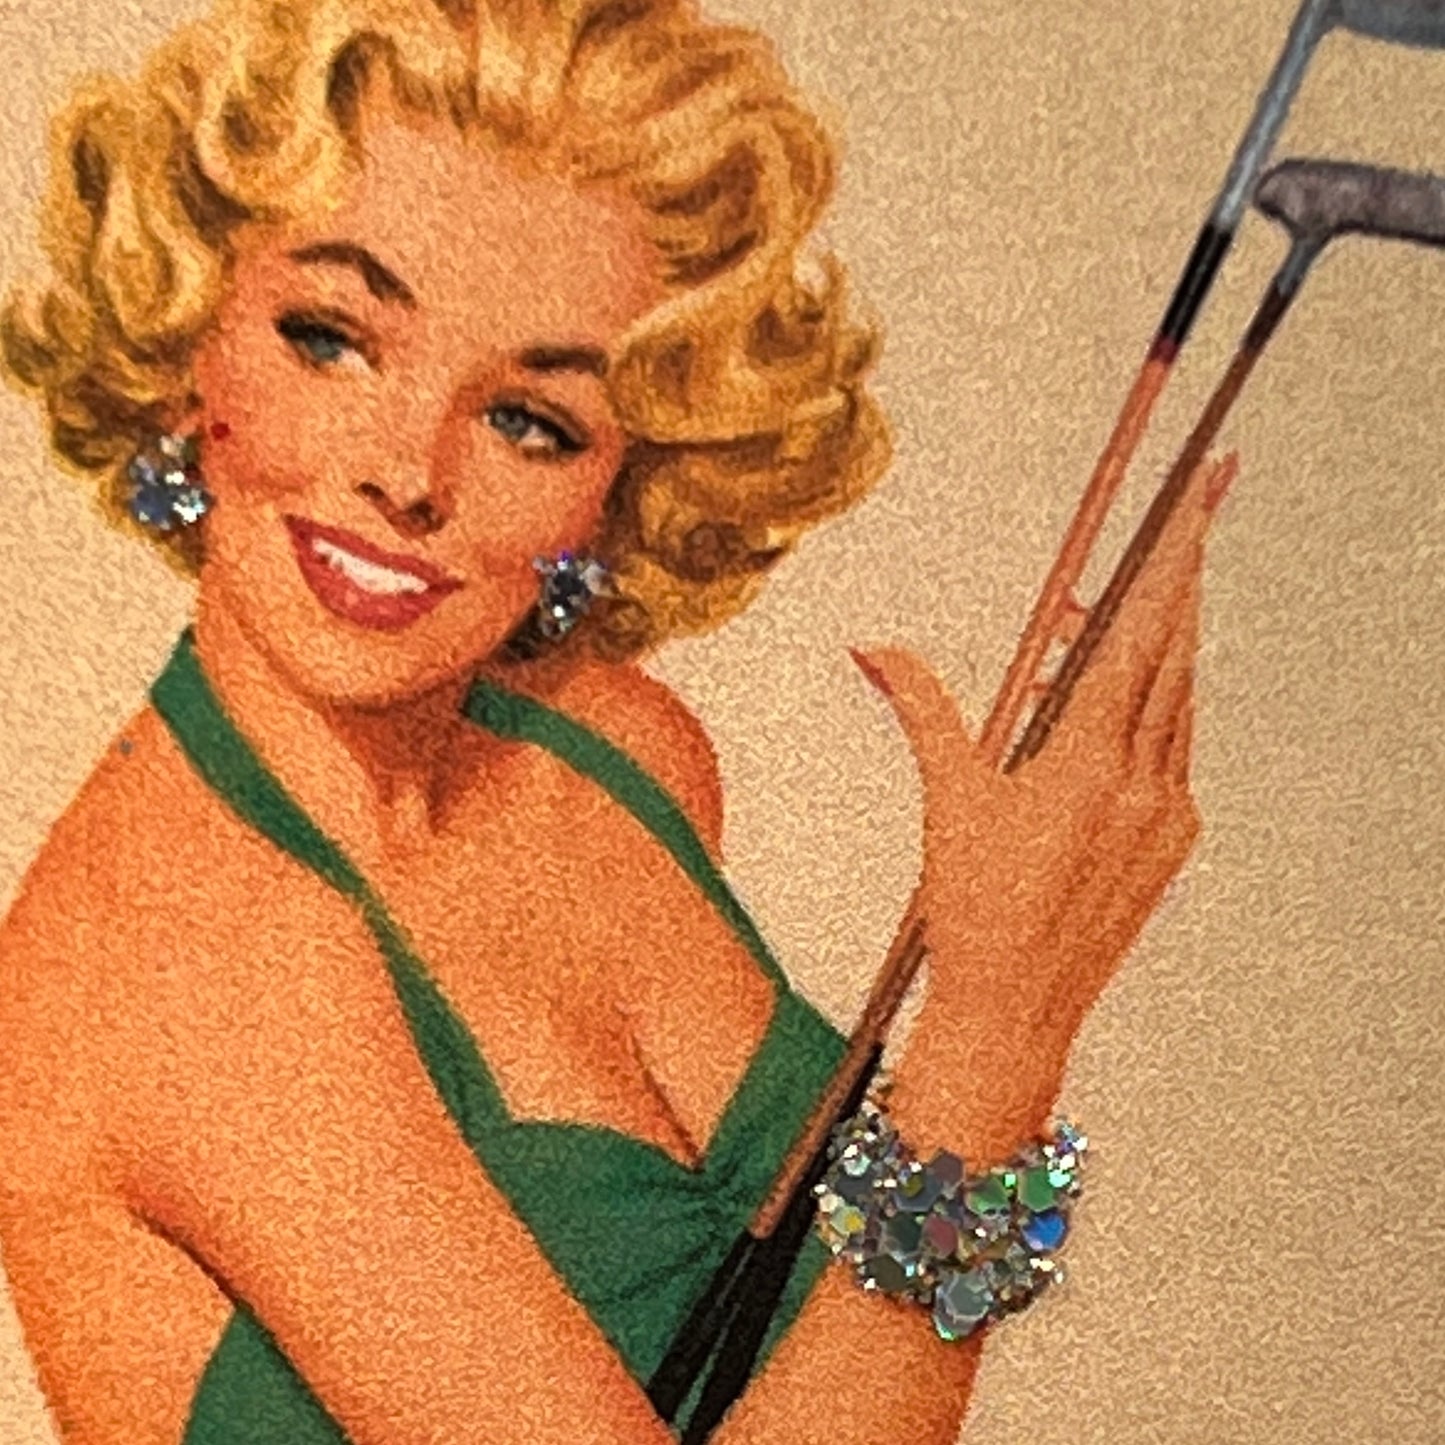 Golfer Girl Pin-Up Note Card Collection